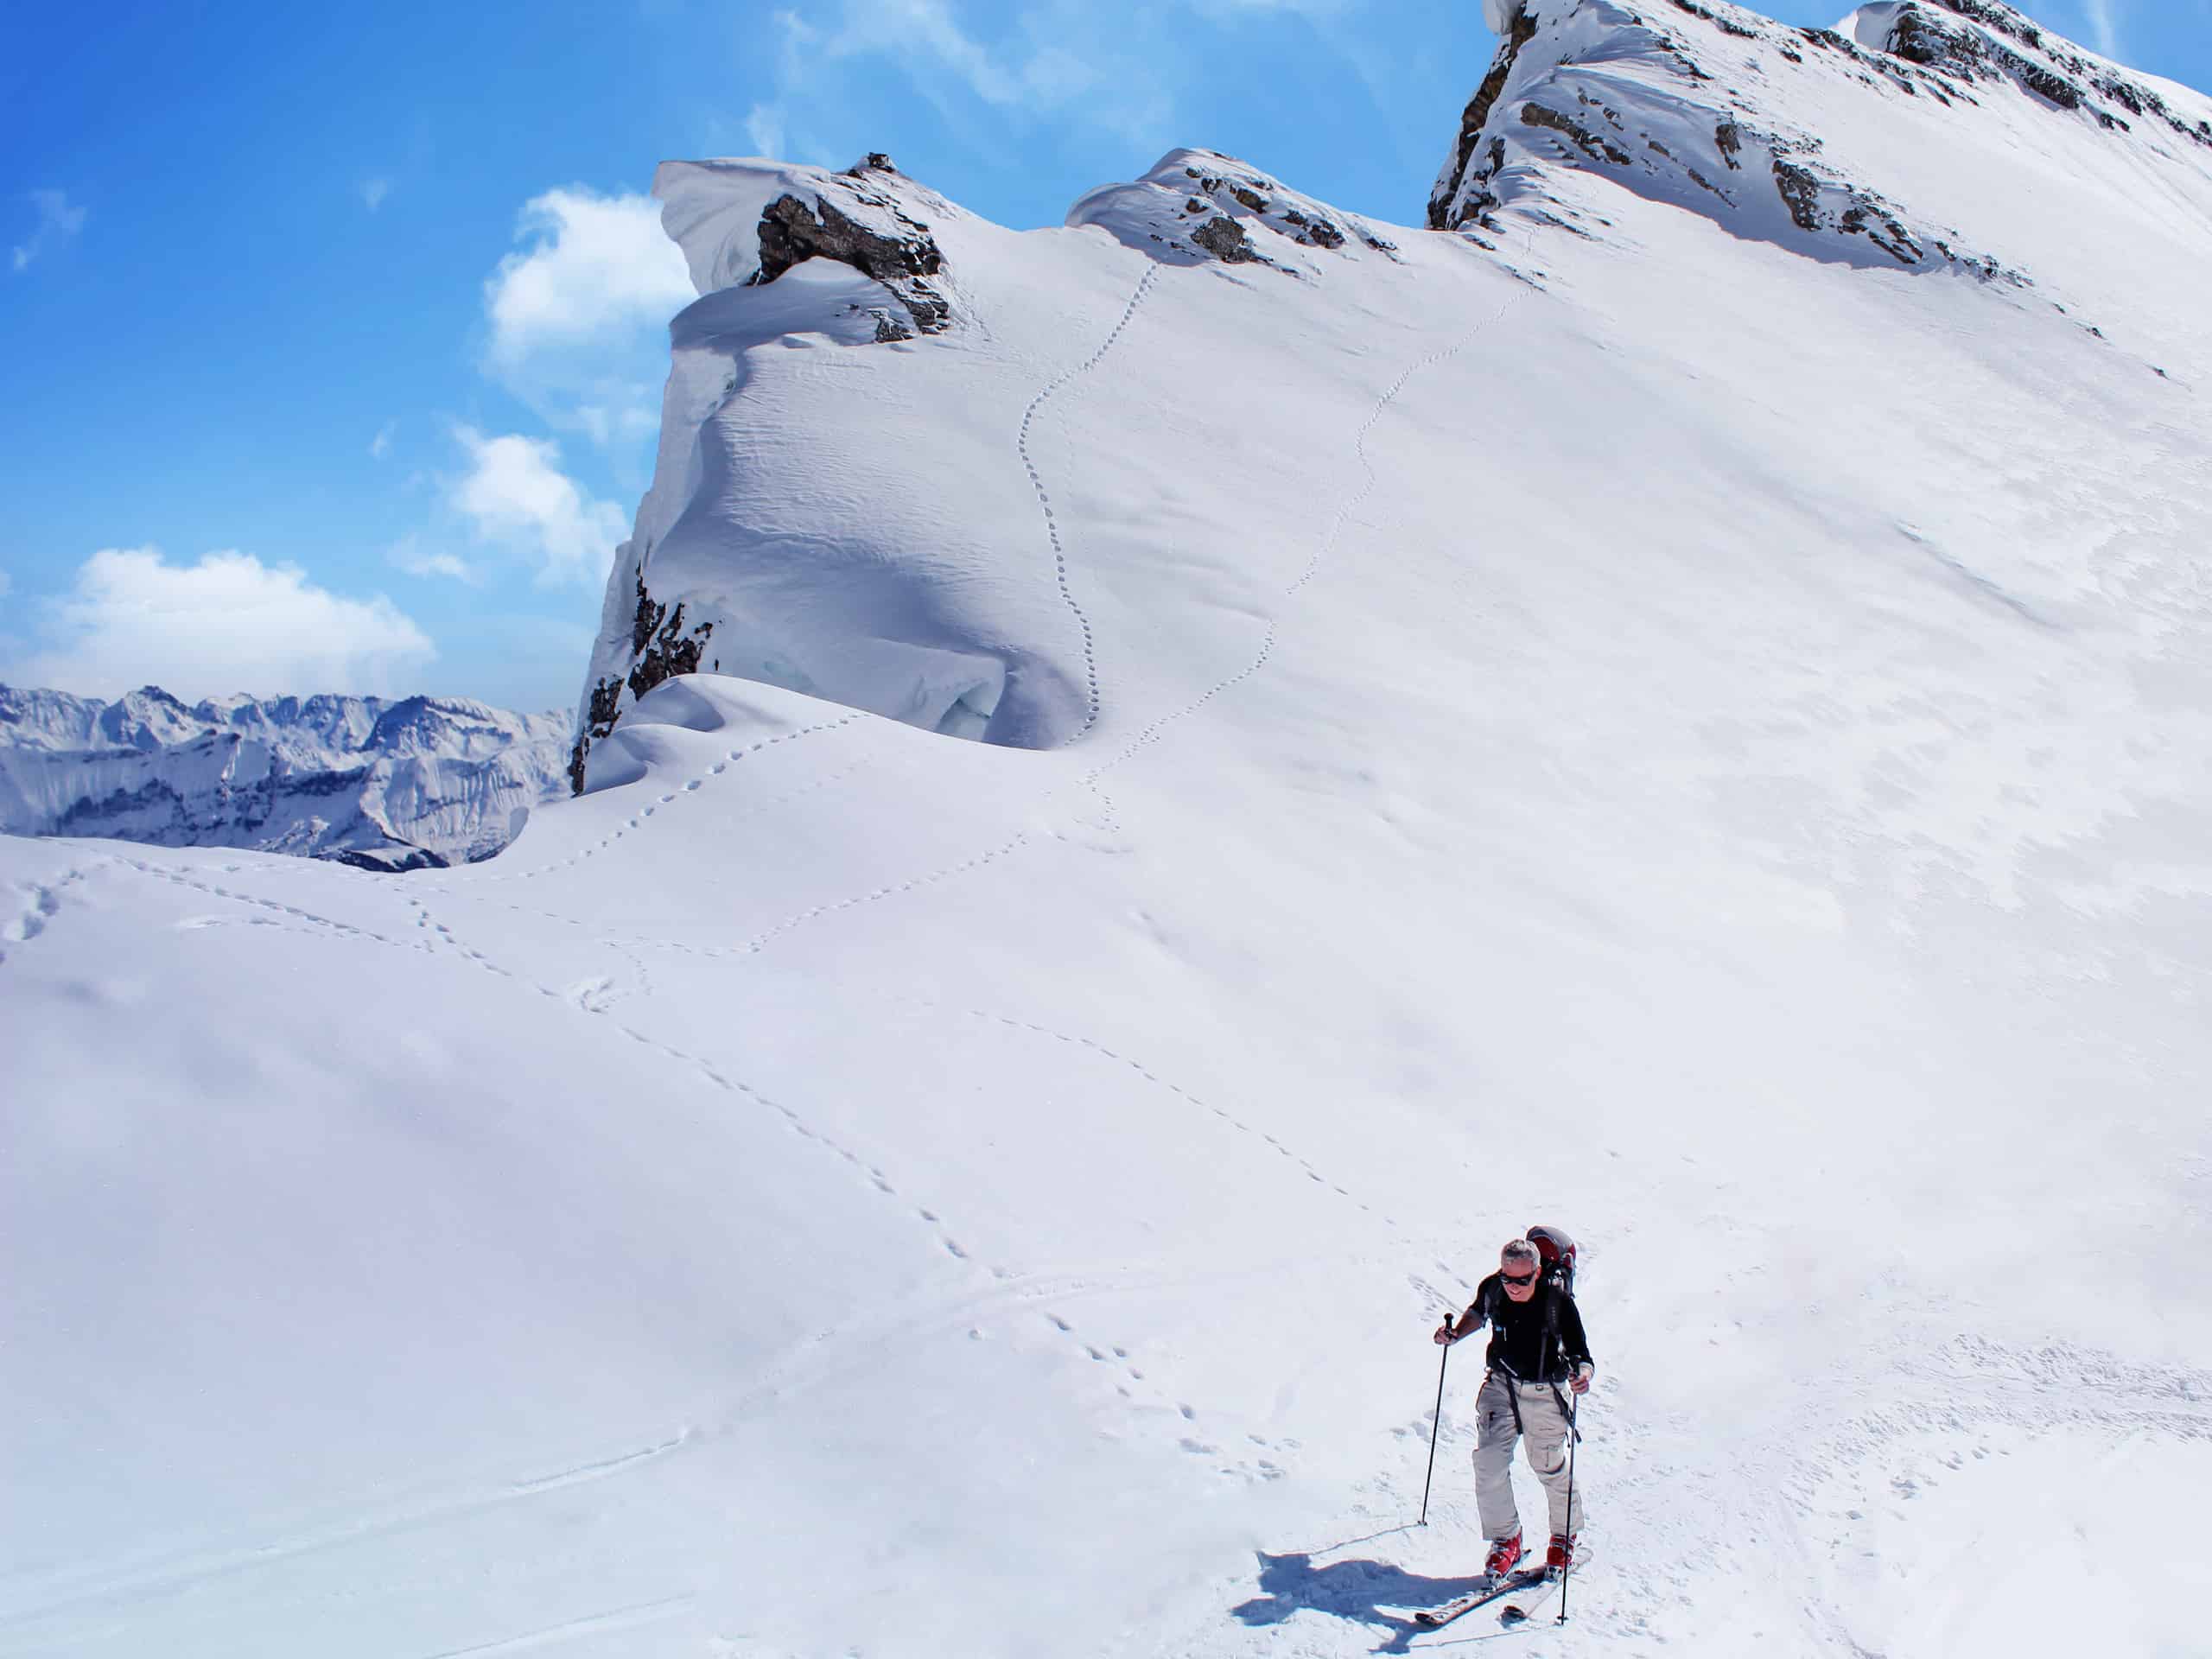 Spring activities in the Alps: Spring skiing